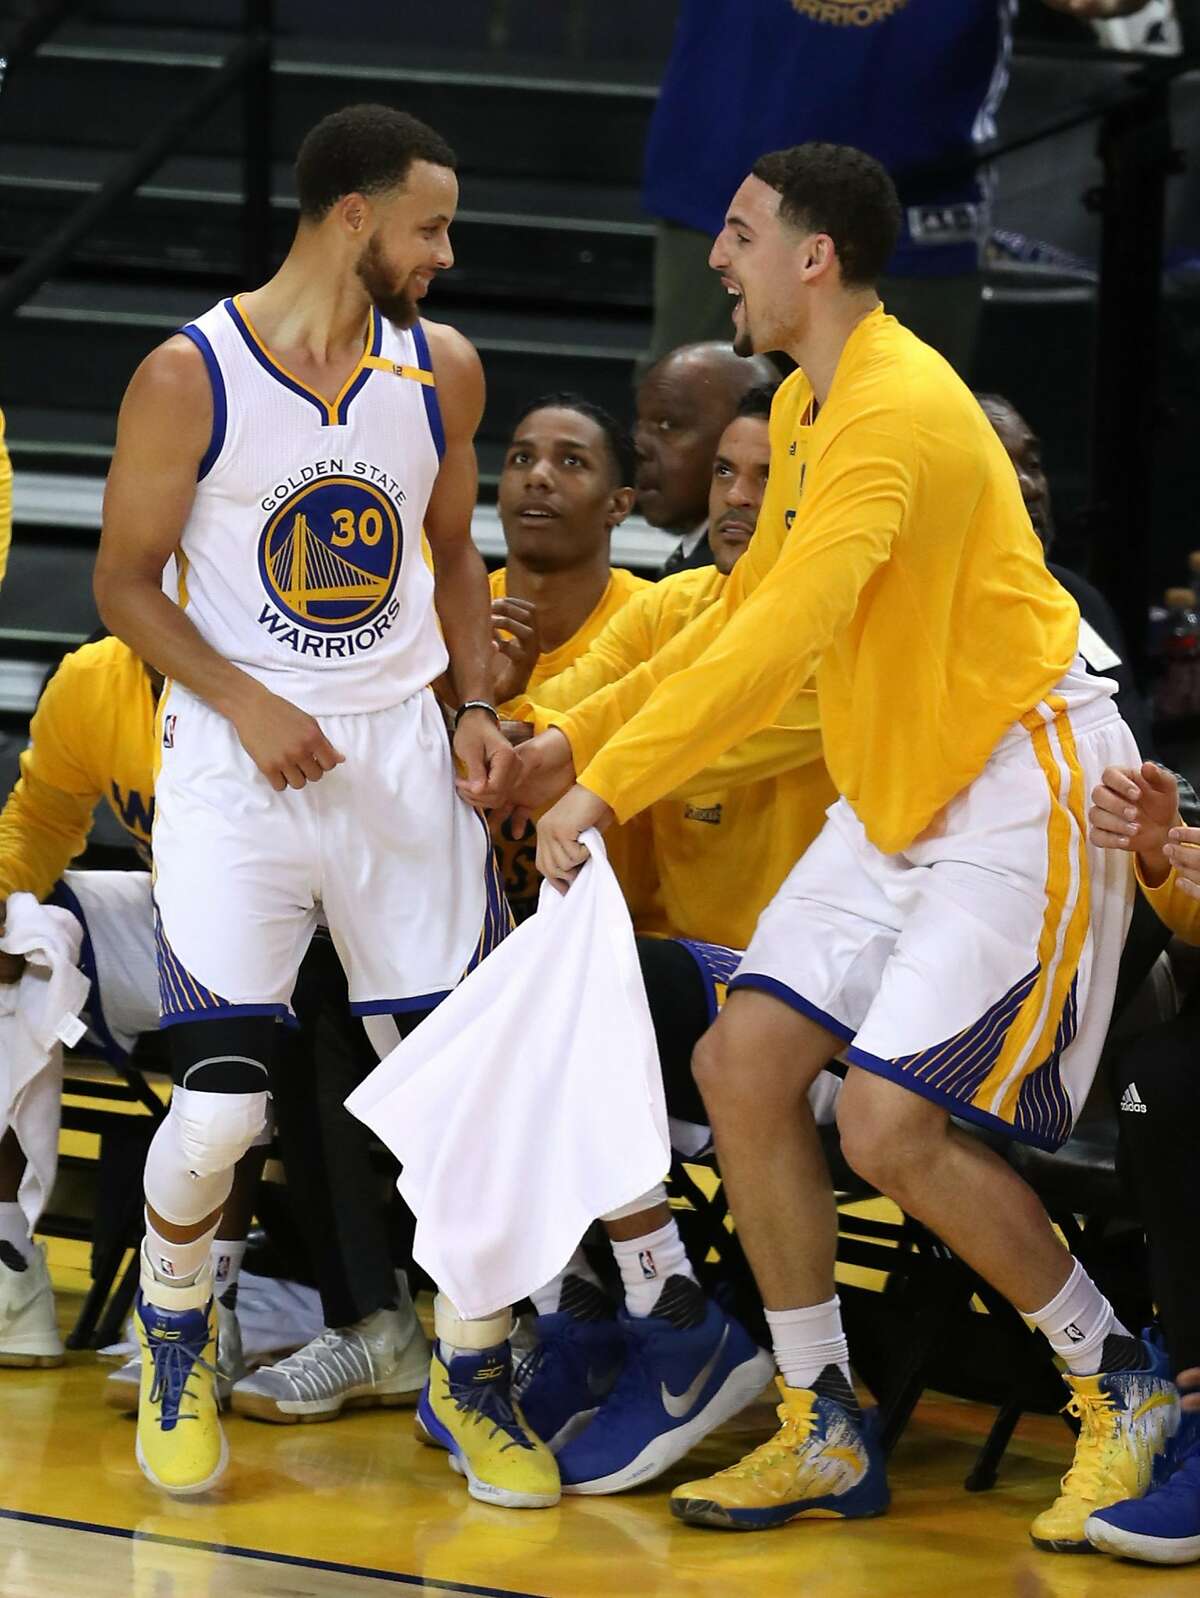 Golden State Warriors' Stephen Curry celebrates a 4th quarter 3-pointer with Klay Thompson against Utah Jazz during Game 2 of NBA Western Conference Semifinals at Oracle Arena in Oakland, Calif., on Thursday, May 4, 2017.